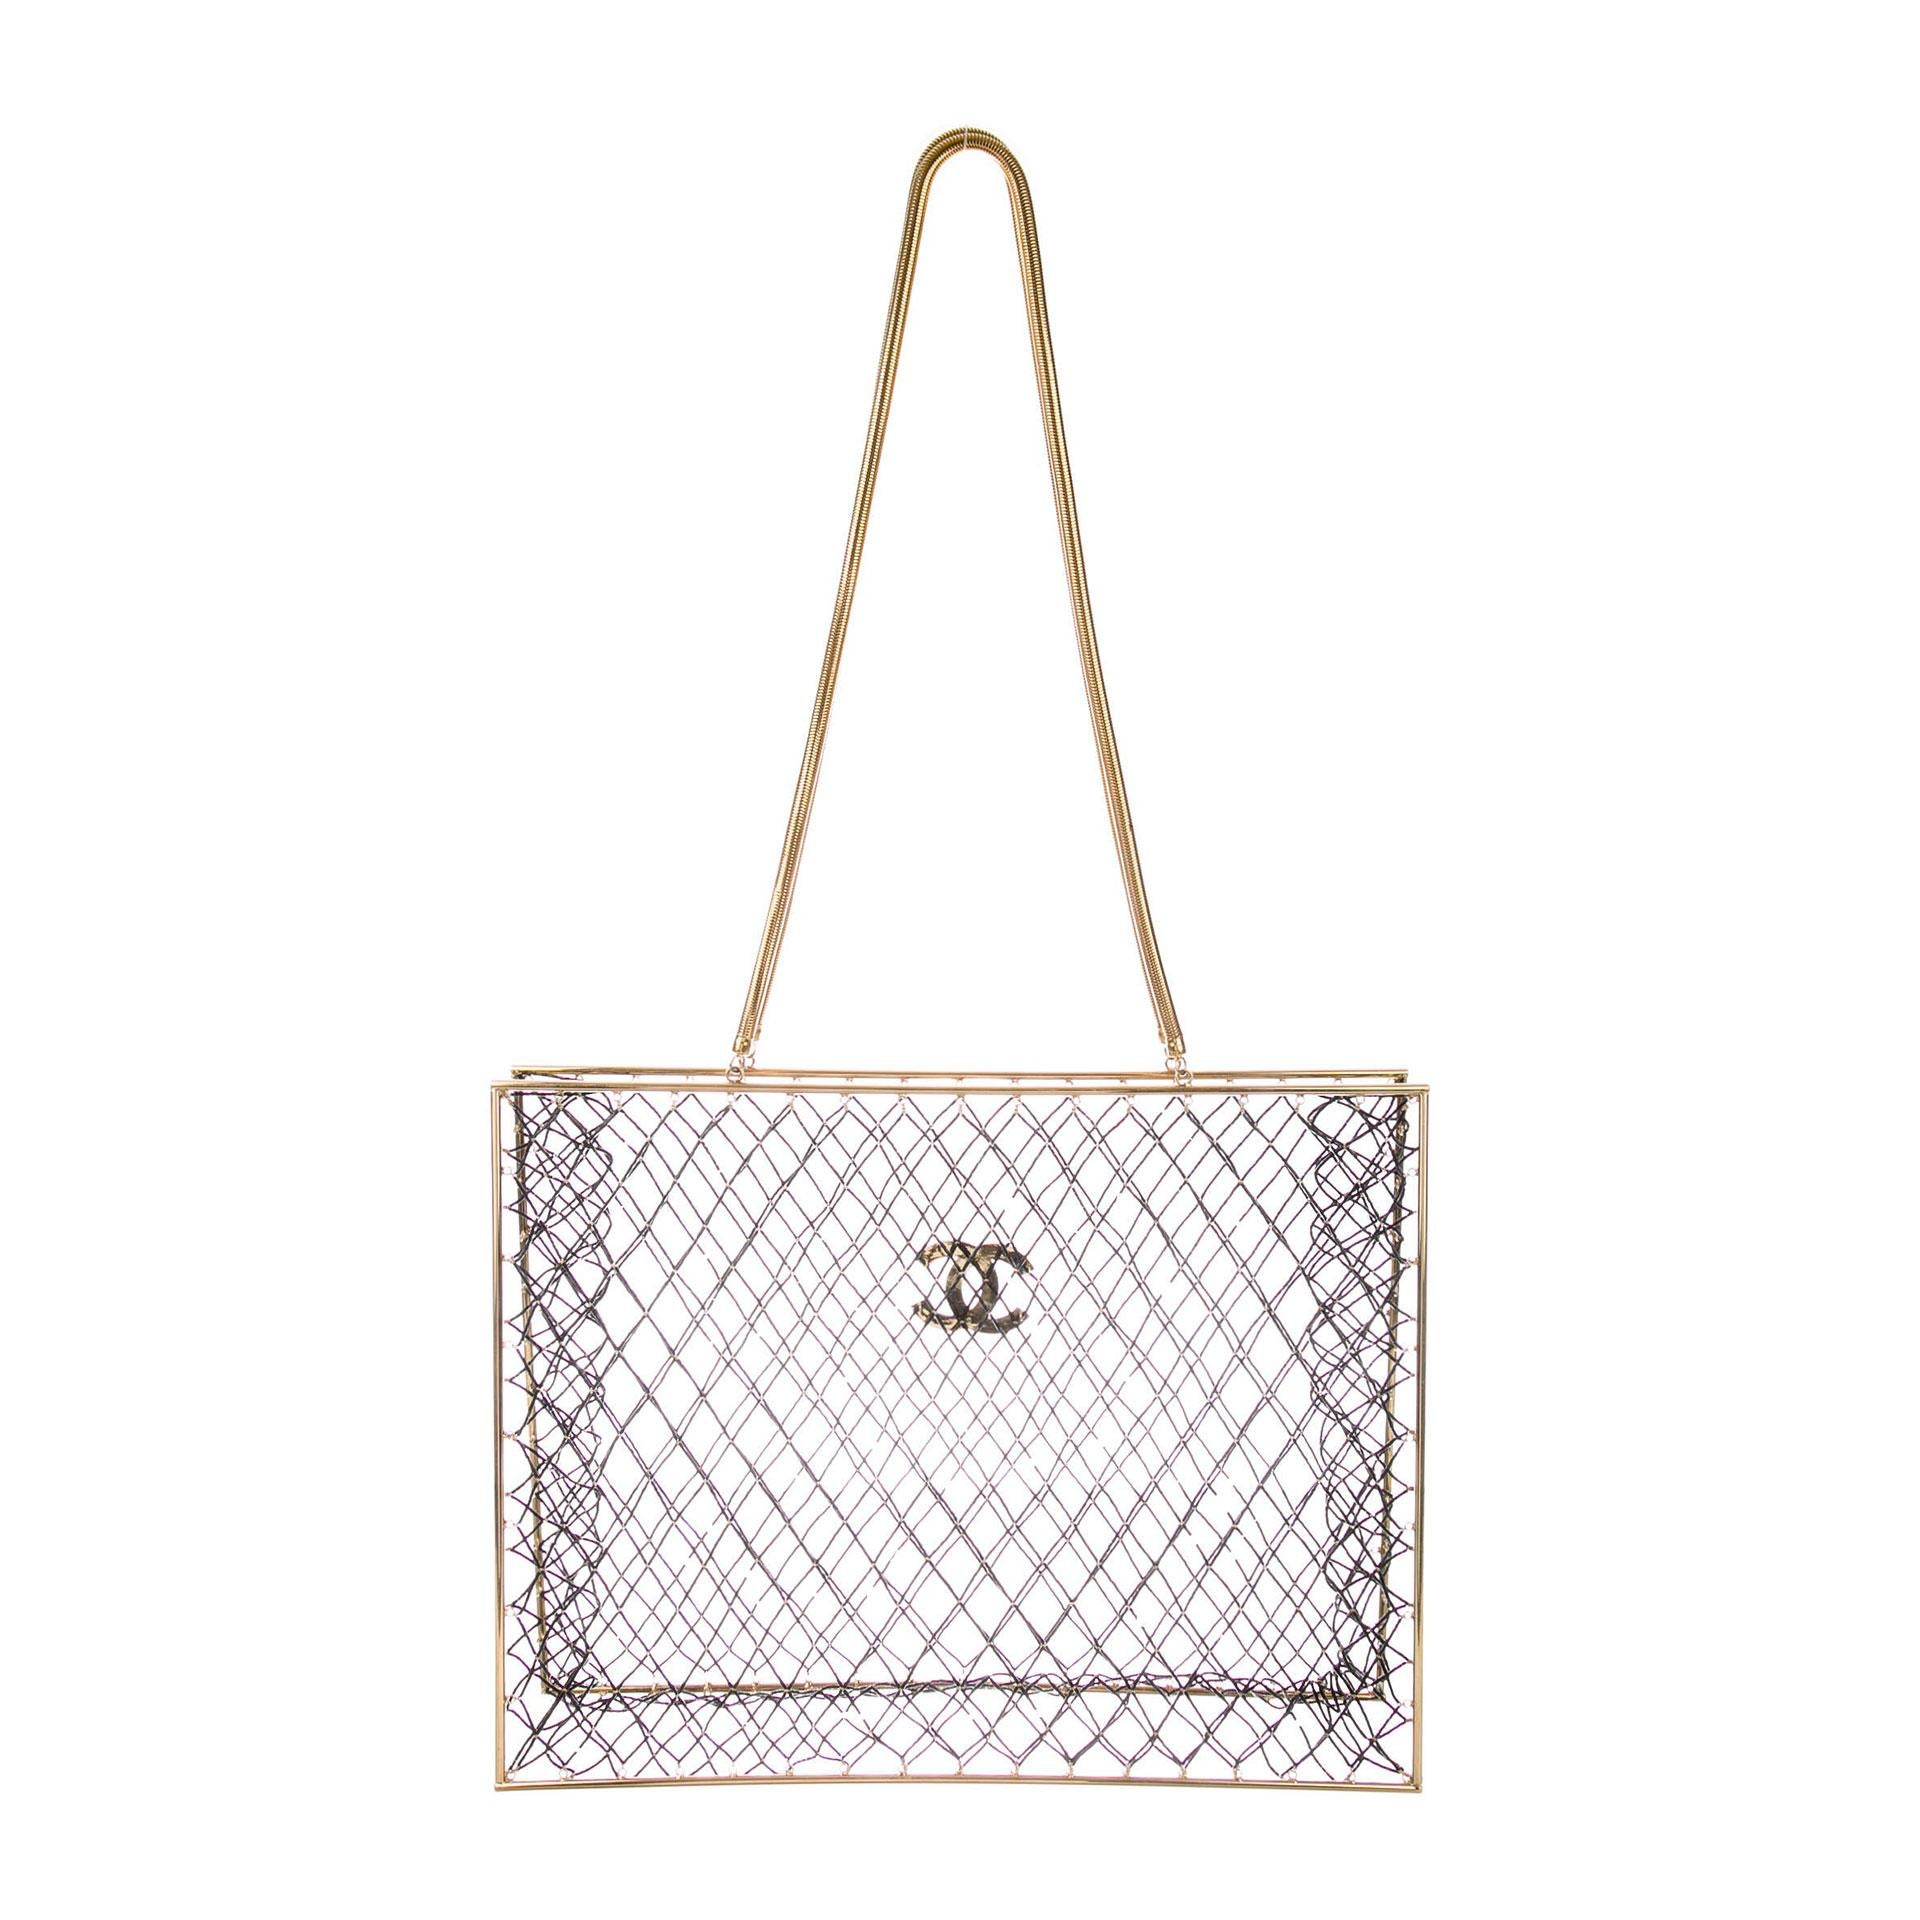 Chanel Rare Spring 1997 Vintage Runway Gold Cage Large Shopping Tote Bag  In Good Condition For Sale In Miami, FL